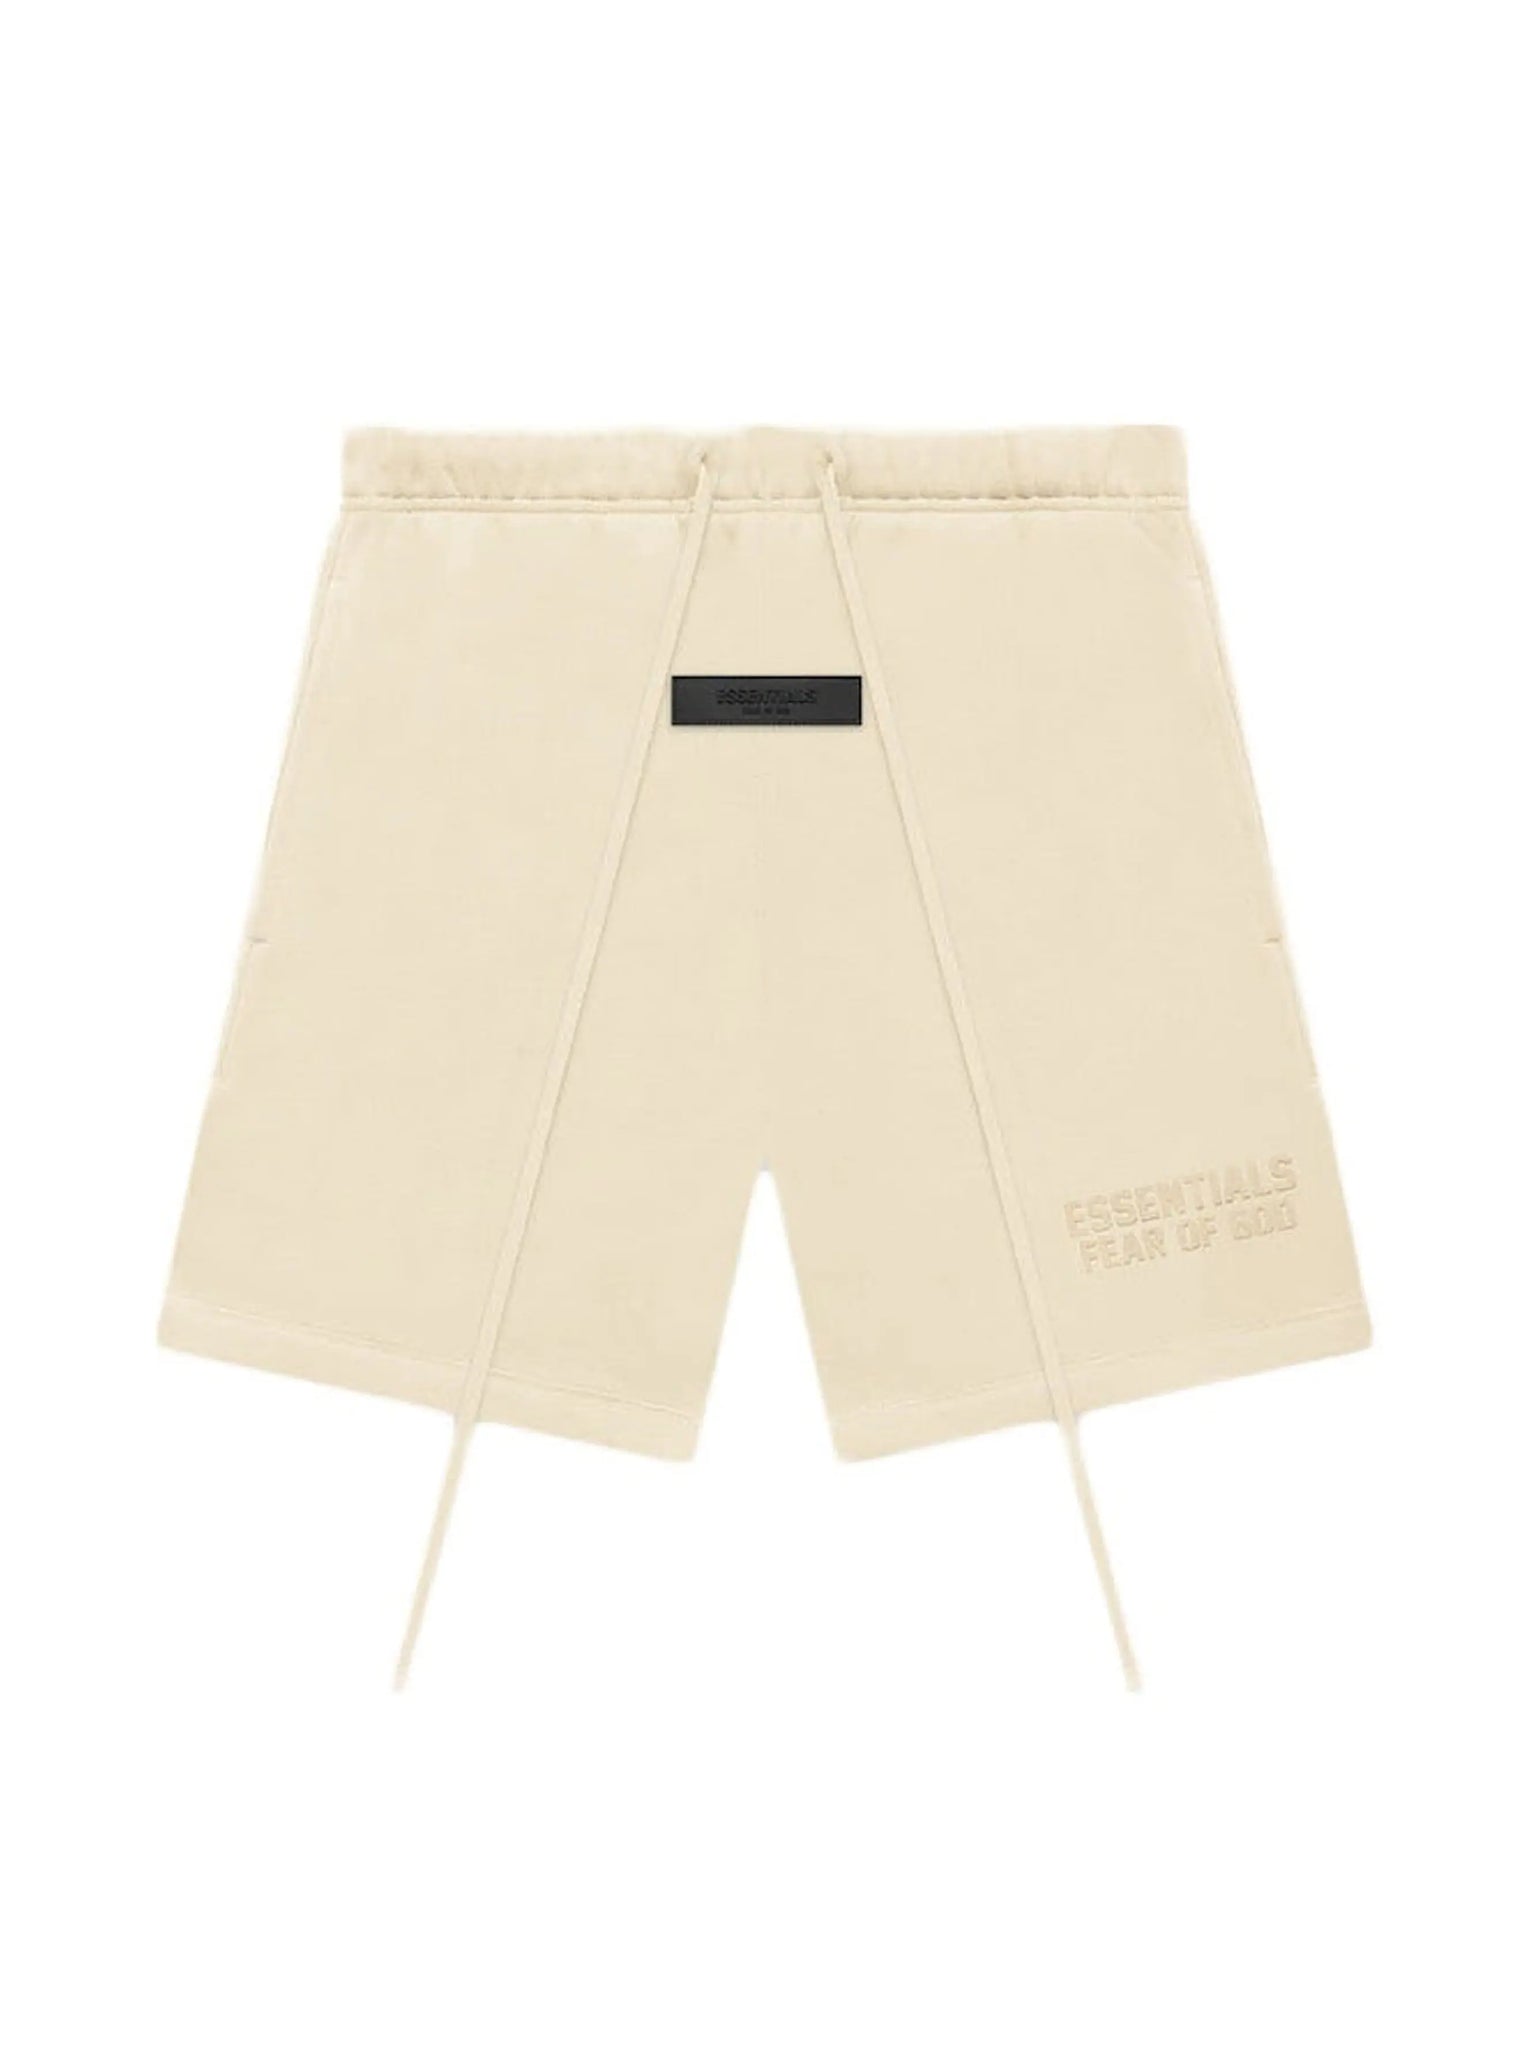 Fear of God Essentials Sweatshorts Egg Shell in Auckland, New Zealand - Shop name